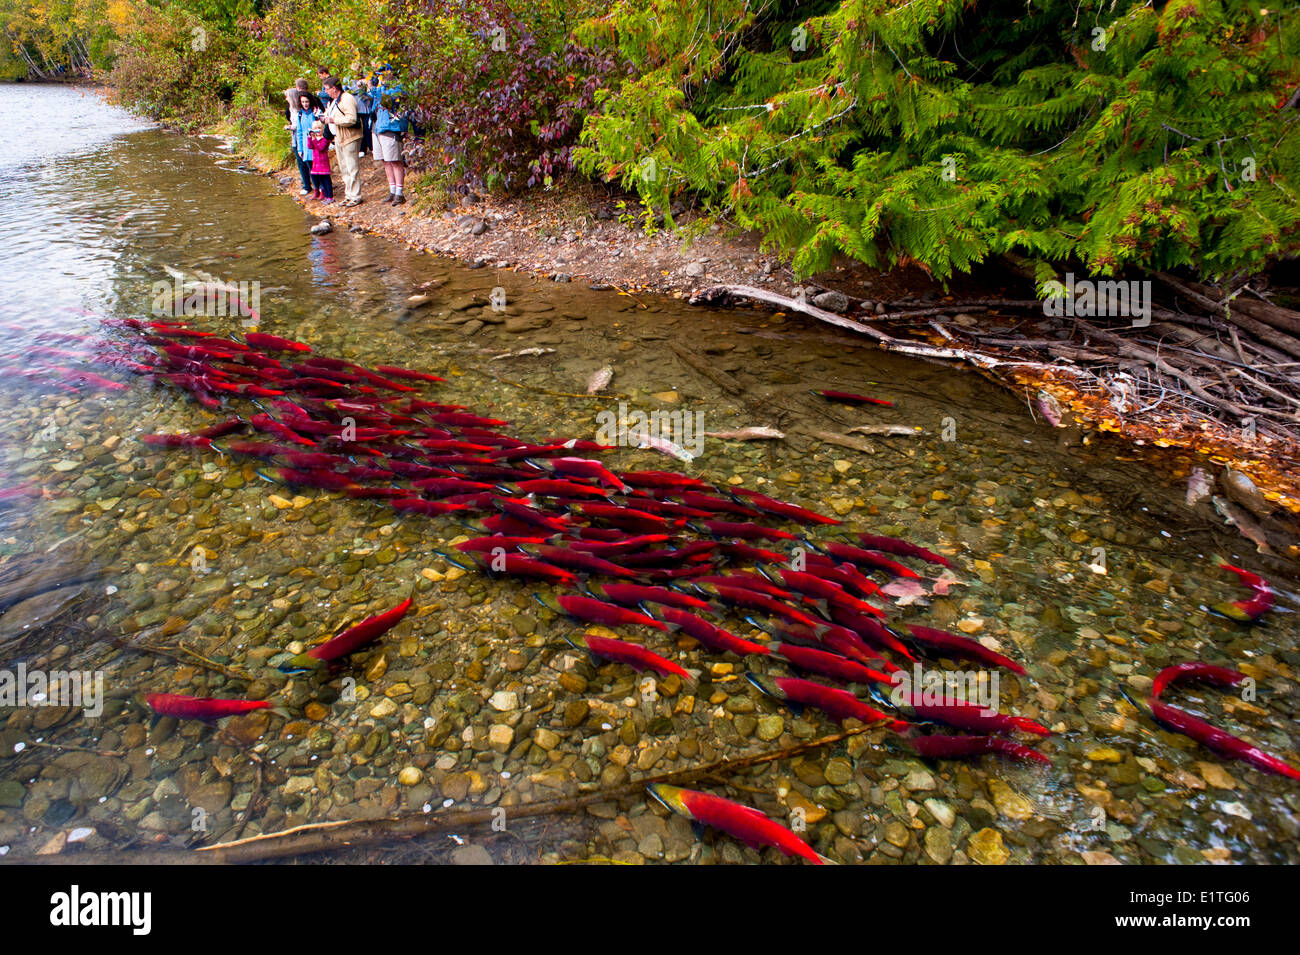 Tourists watching Spawning Sockeye salmon (Oncorhynchus nerka), also called red salmon  in the Adams River, British Colulmbia, C Stock Photo